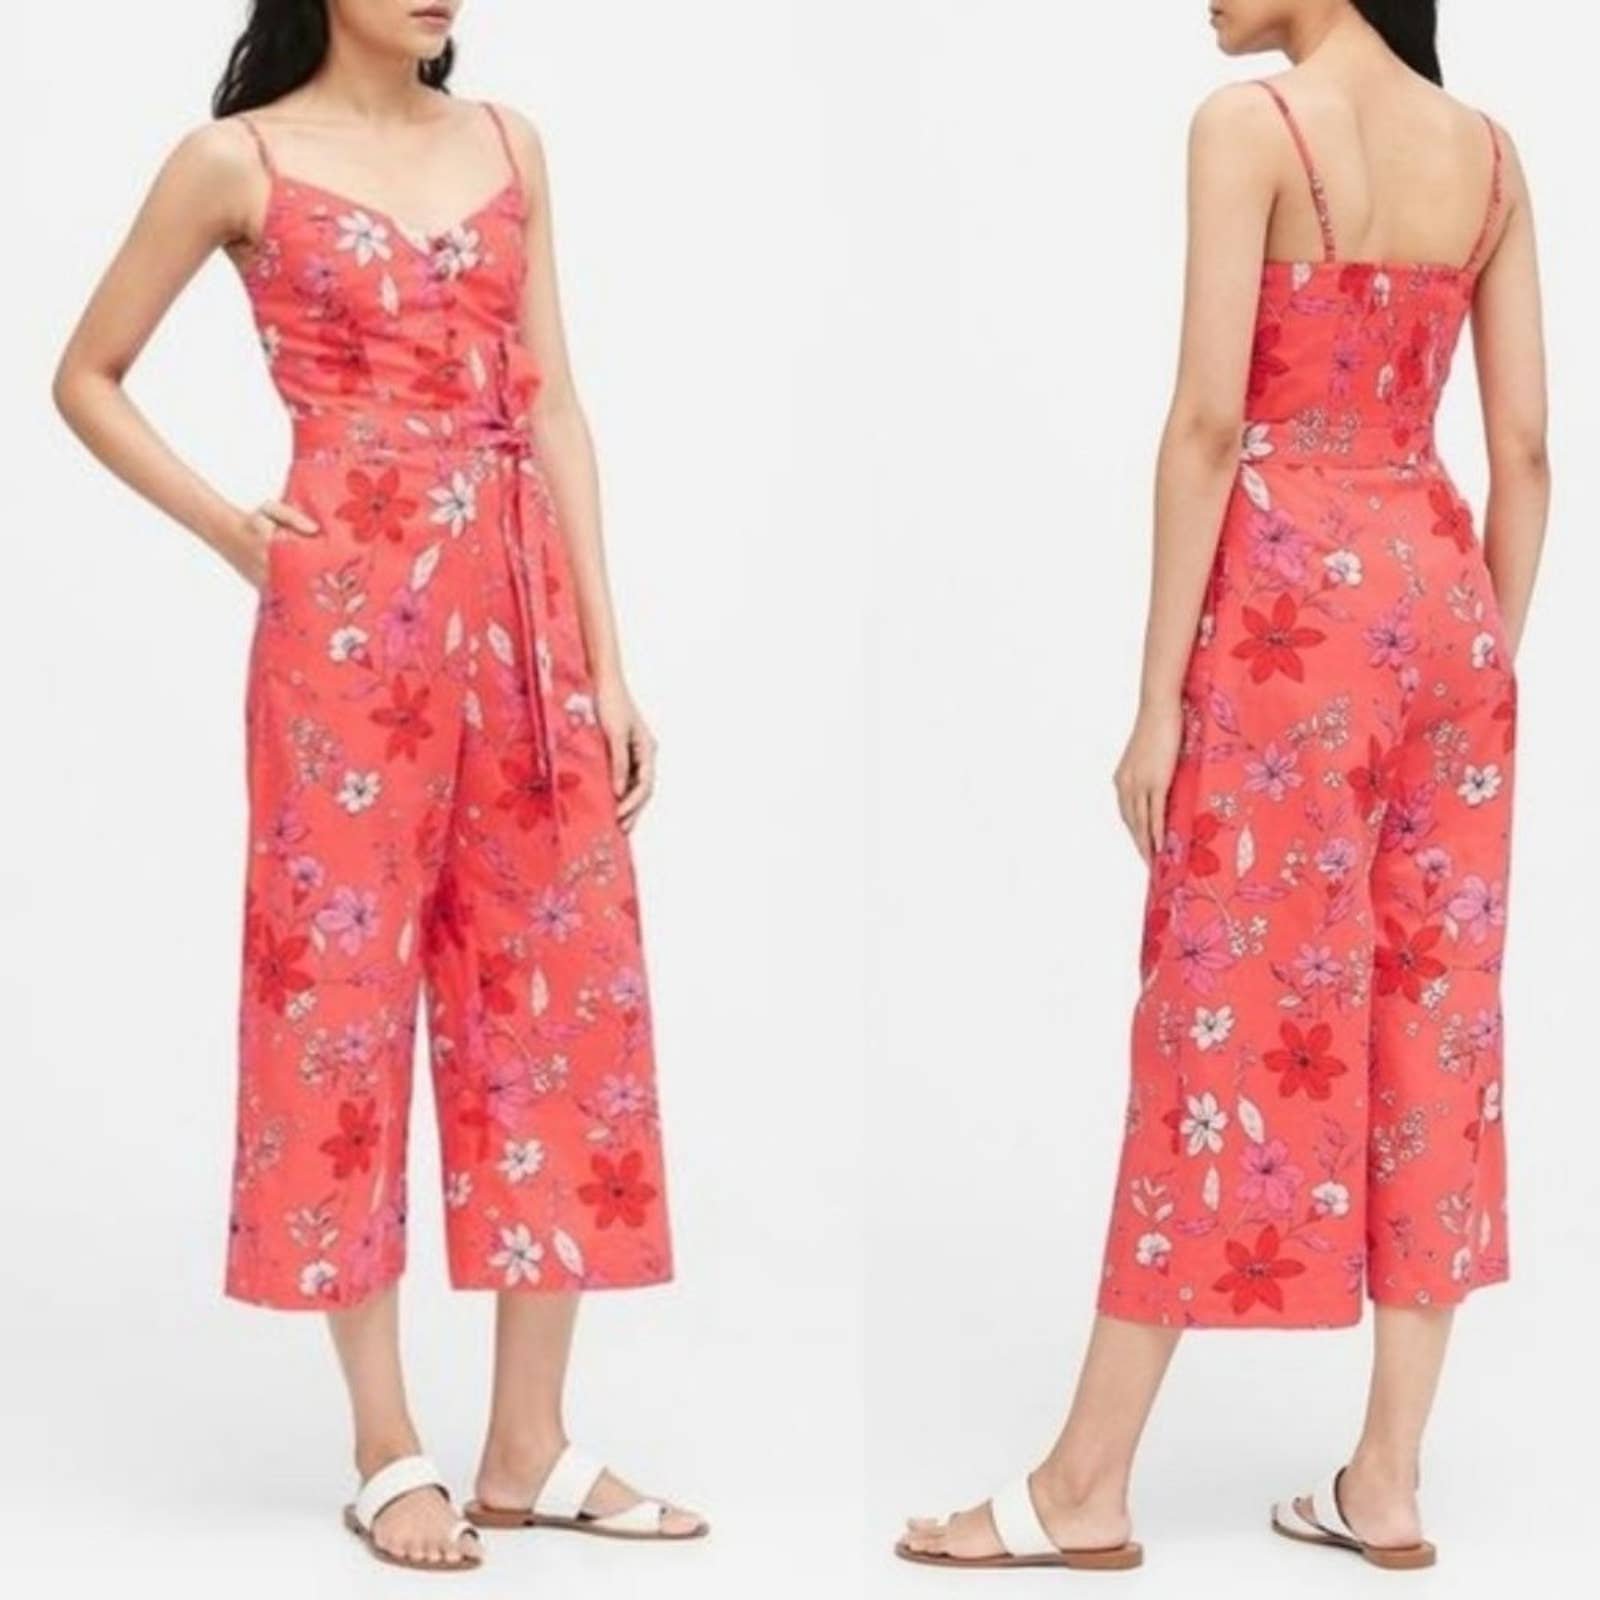 good price New Banana Republic Linen Coral Floral Print Cropped Length Jumpsuit Size 14 N2qNzpKCP High Quaity